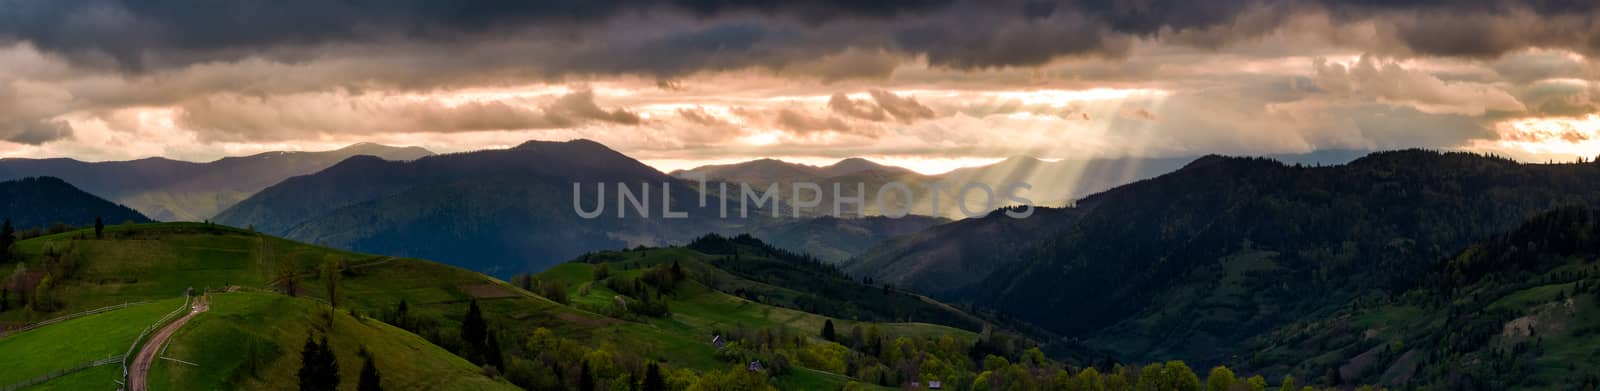 panorama of mountainous countryside at sunset by Pellinni